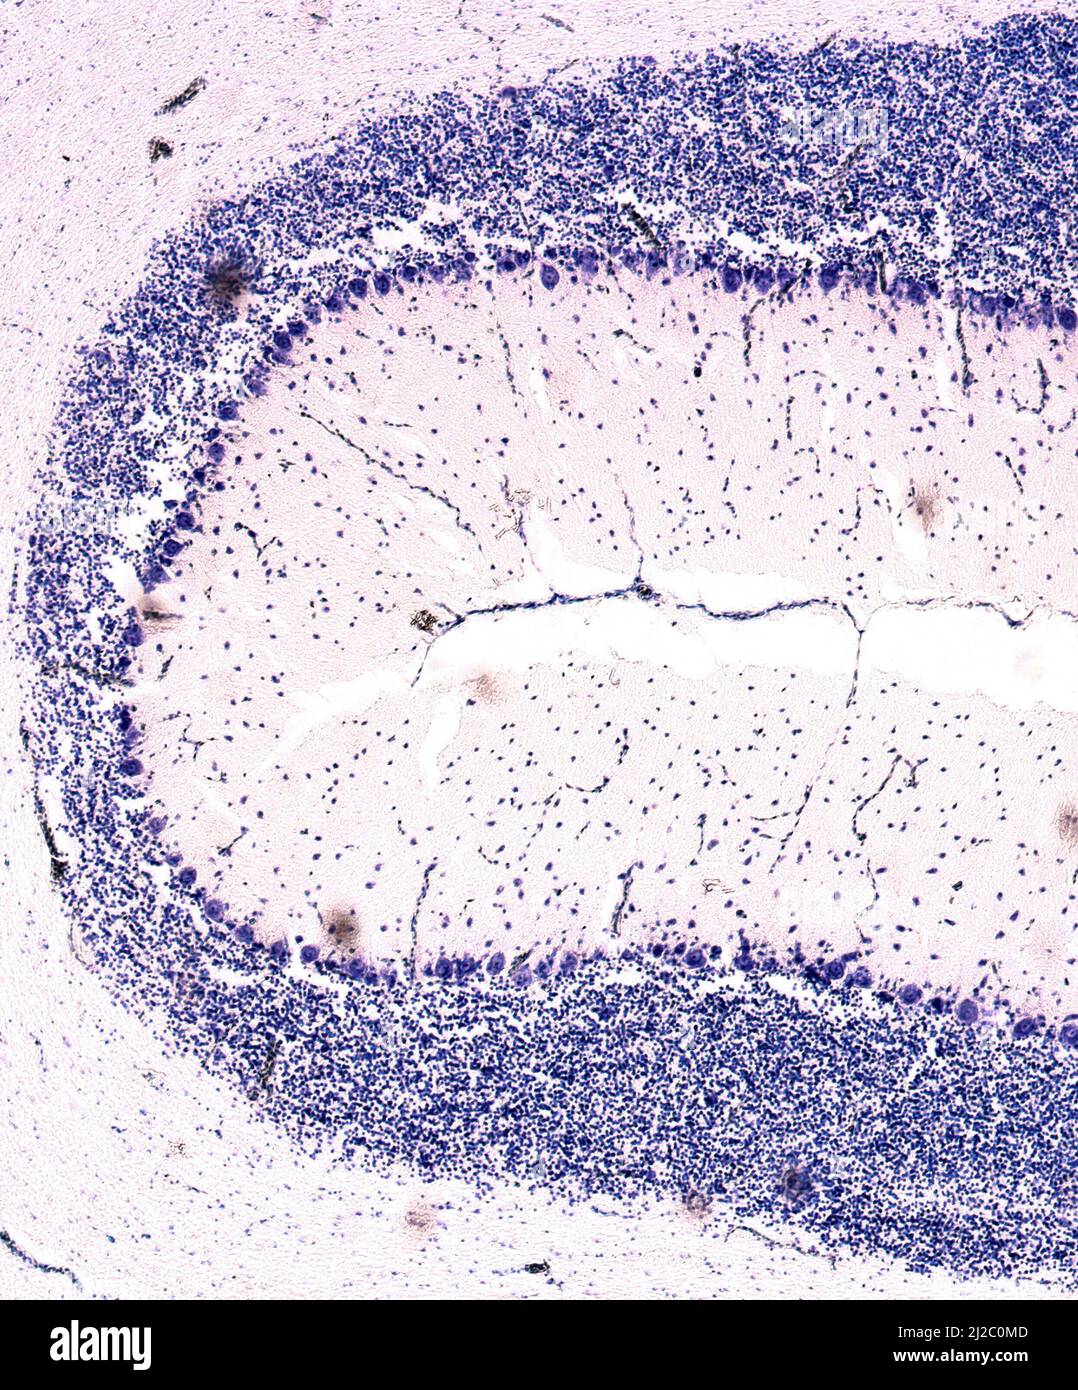 Cross section of a cerebellum. Light micrograph. Cresyl Violet Staining (Nissl Staining). Stock Photo